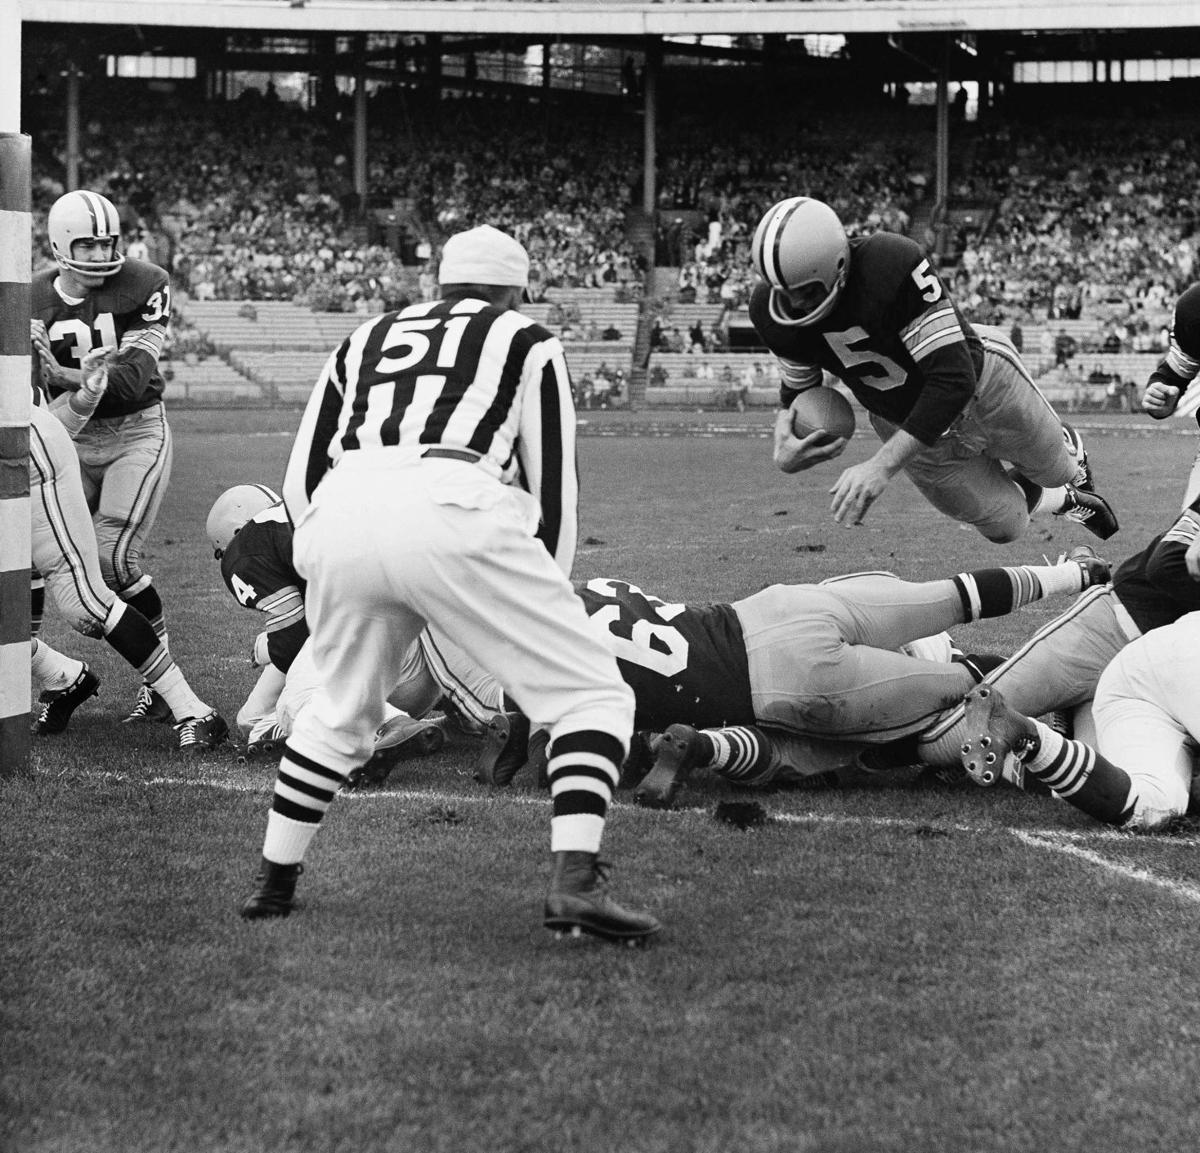 Lombardi legend: Packers Hall of Famer Paul Hornung dies at 84 | Pro football | madison.com